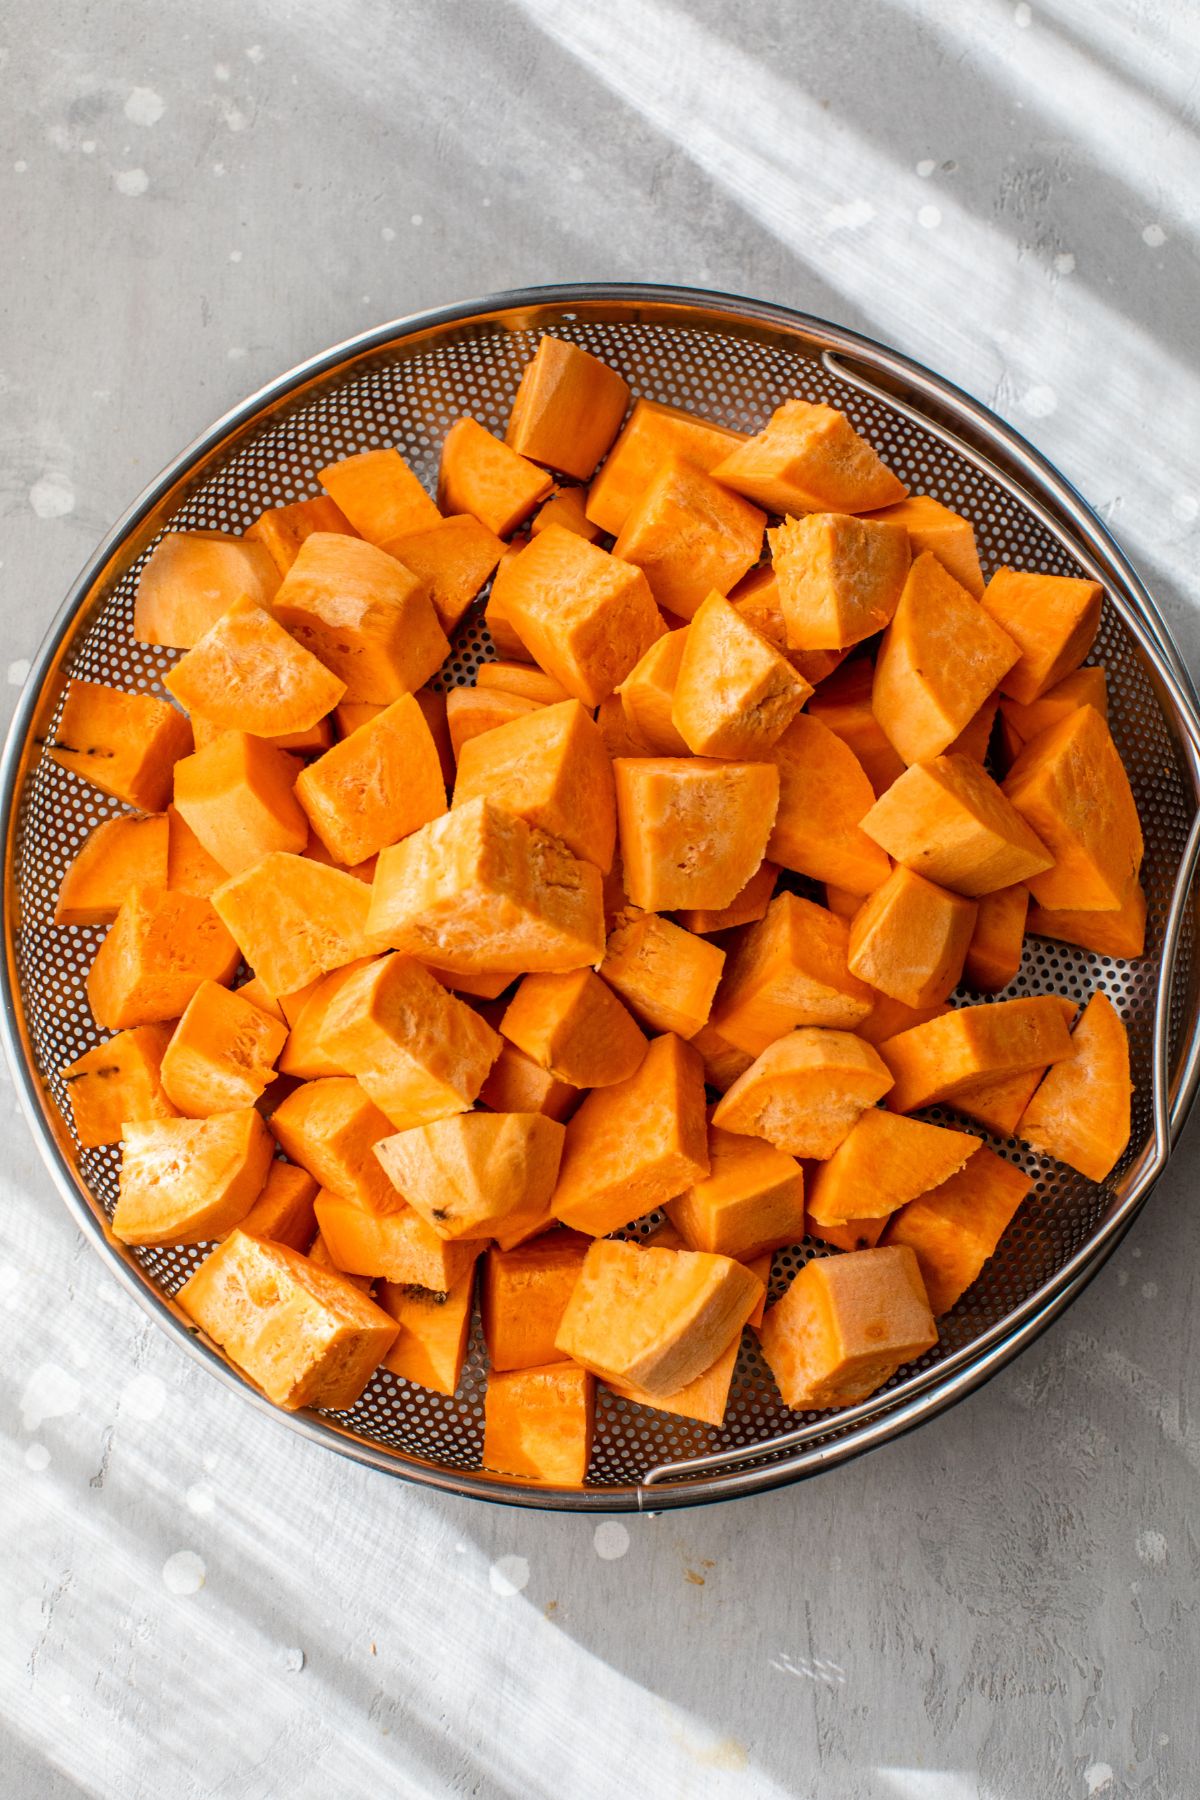 Chopped sweet potato in a colander.